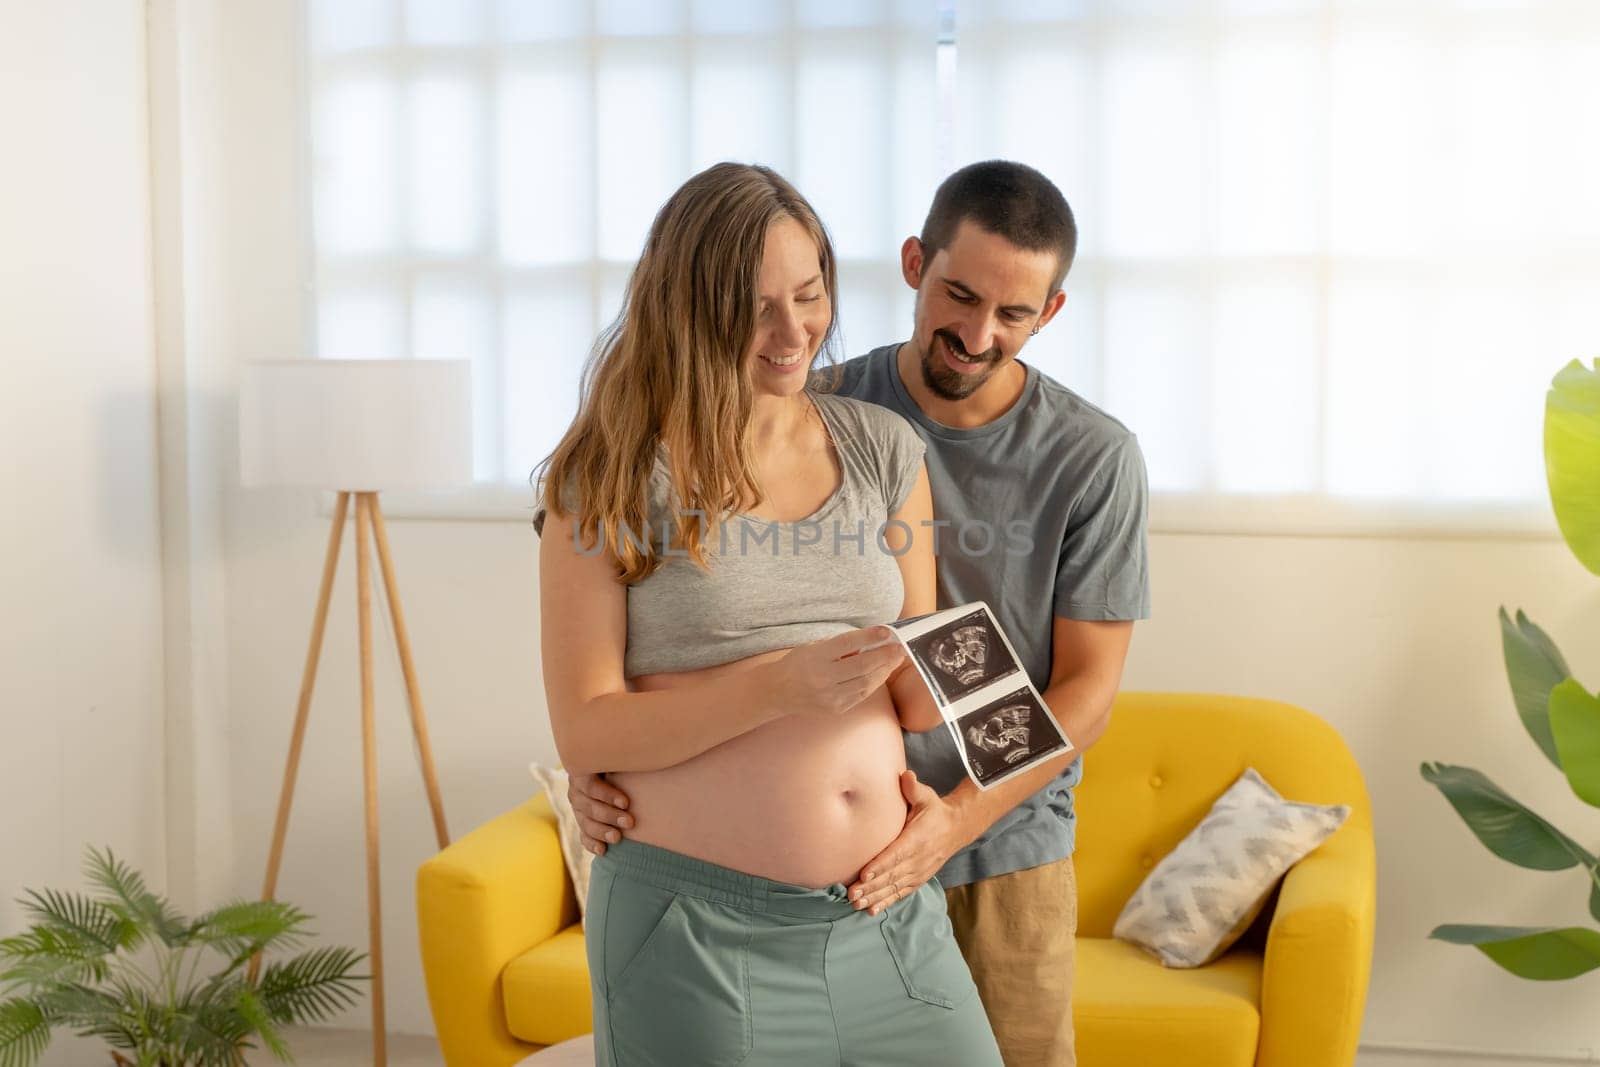 Pregnancy couple looking picture of ultrasound, smiling happily touching belly. High quality photo